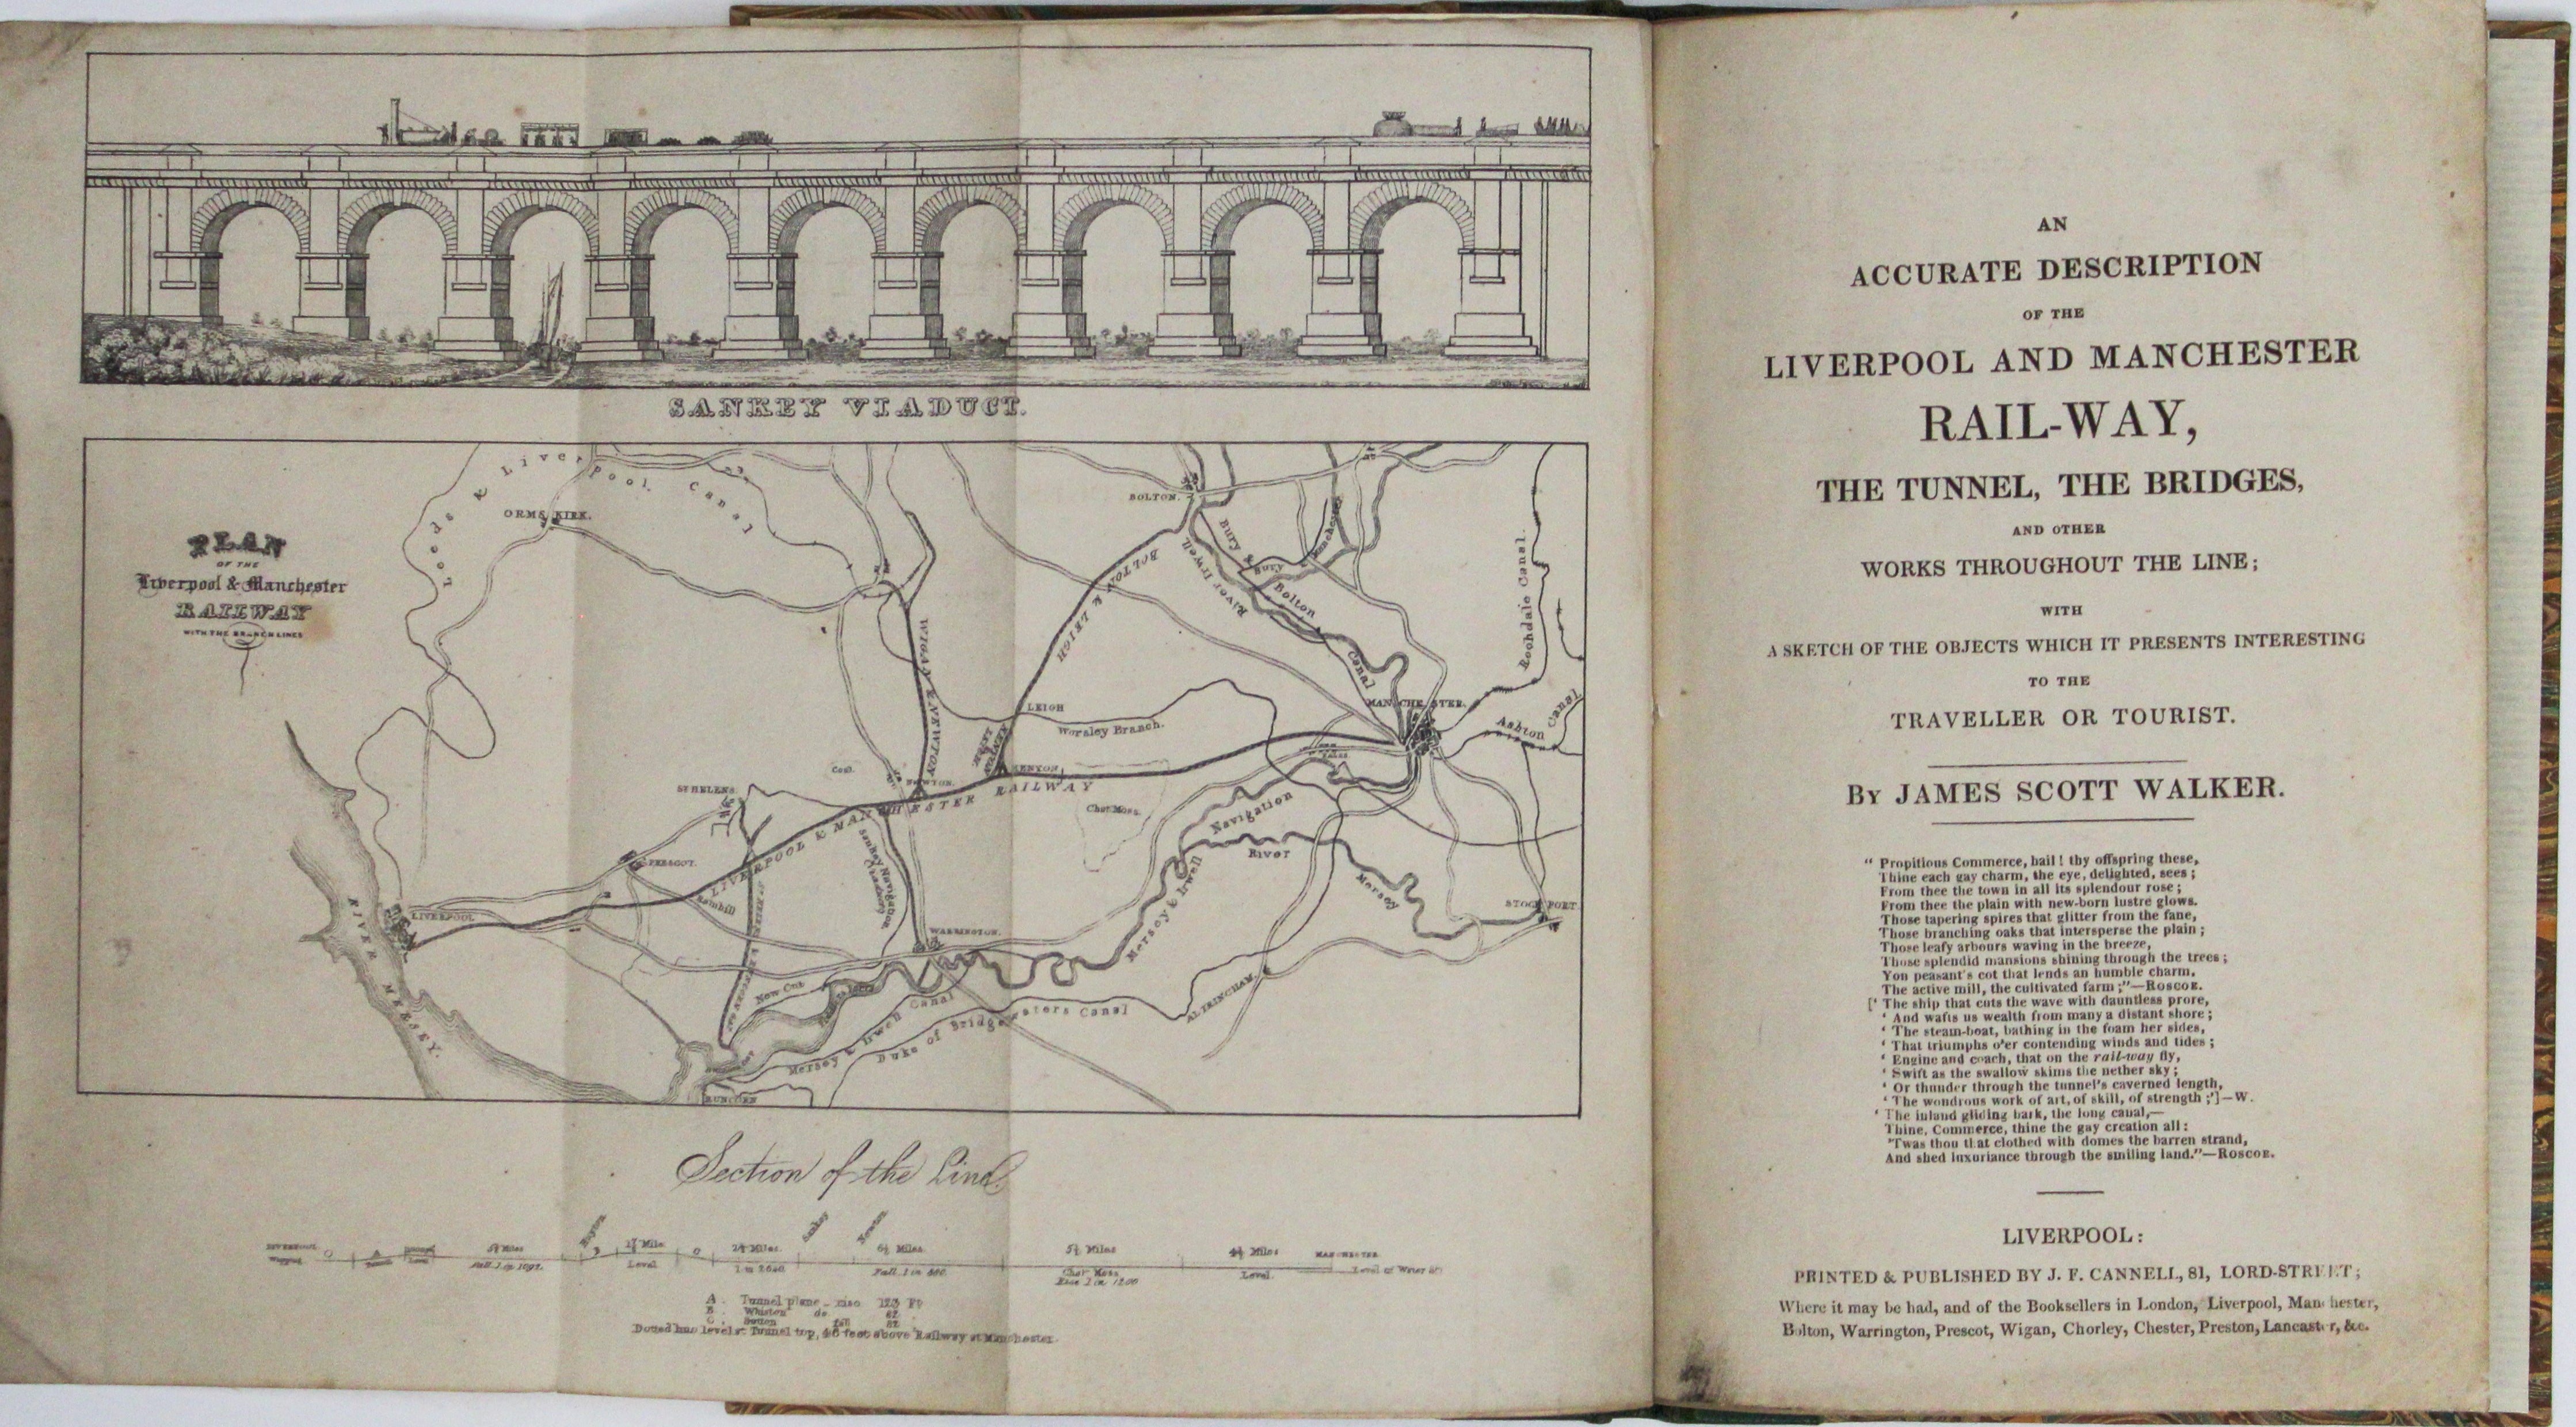 The Opening of the Liverpool-Manchester Railway